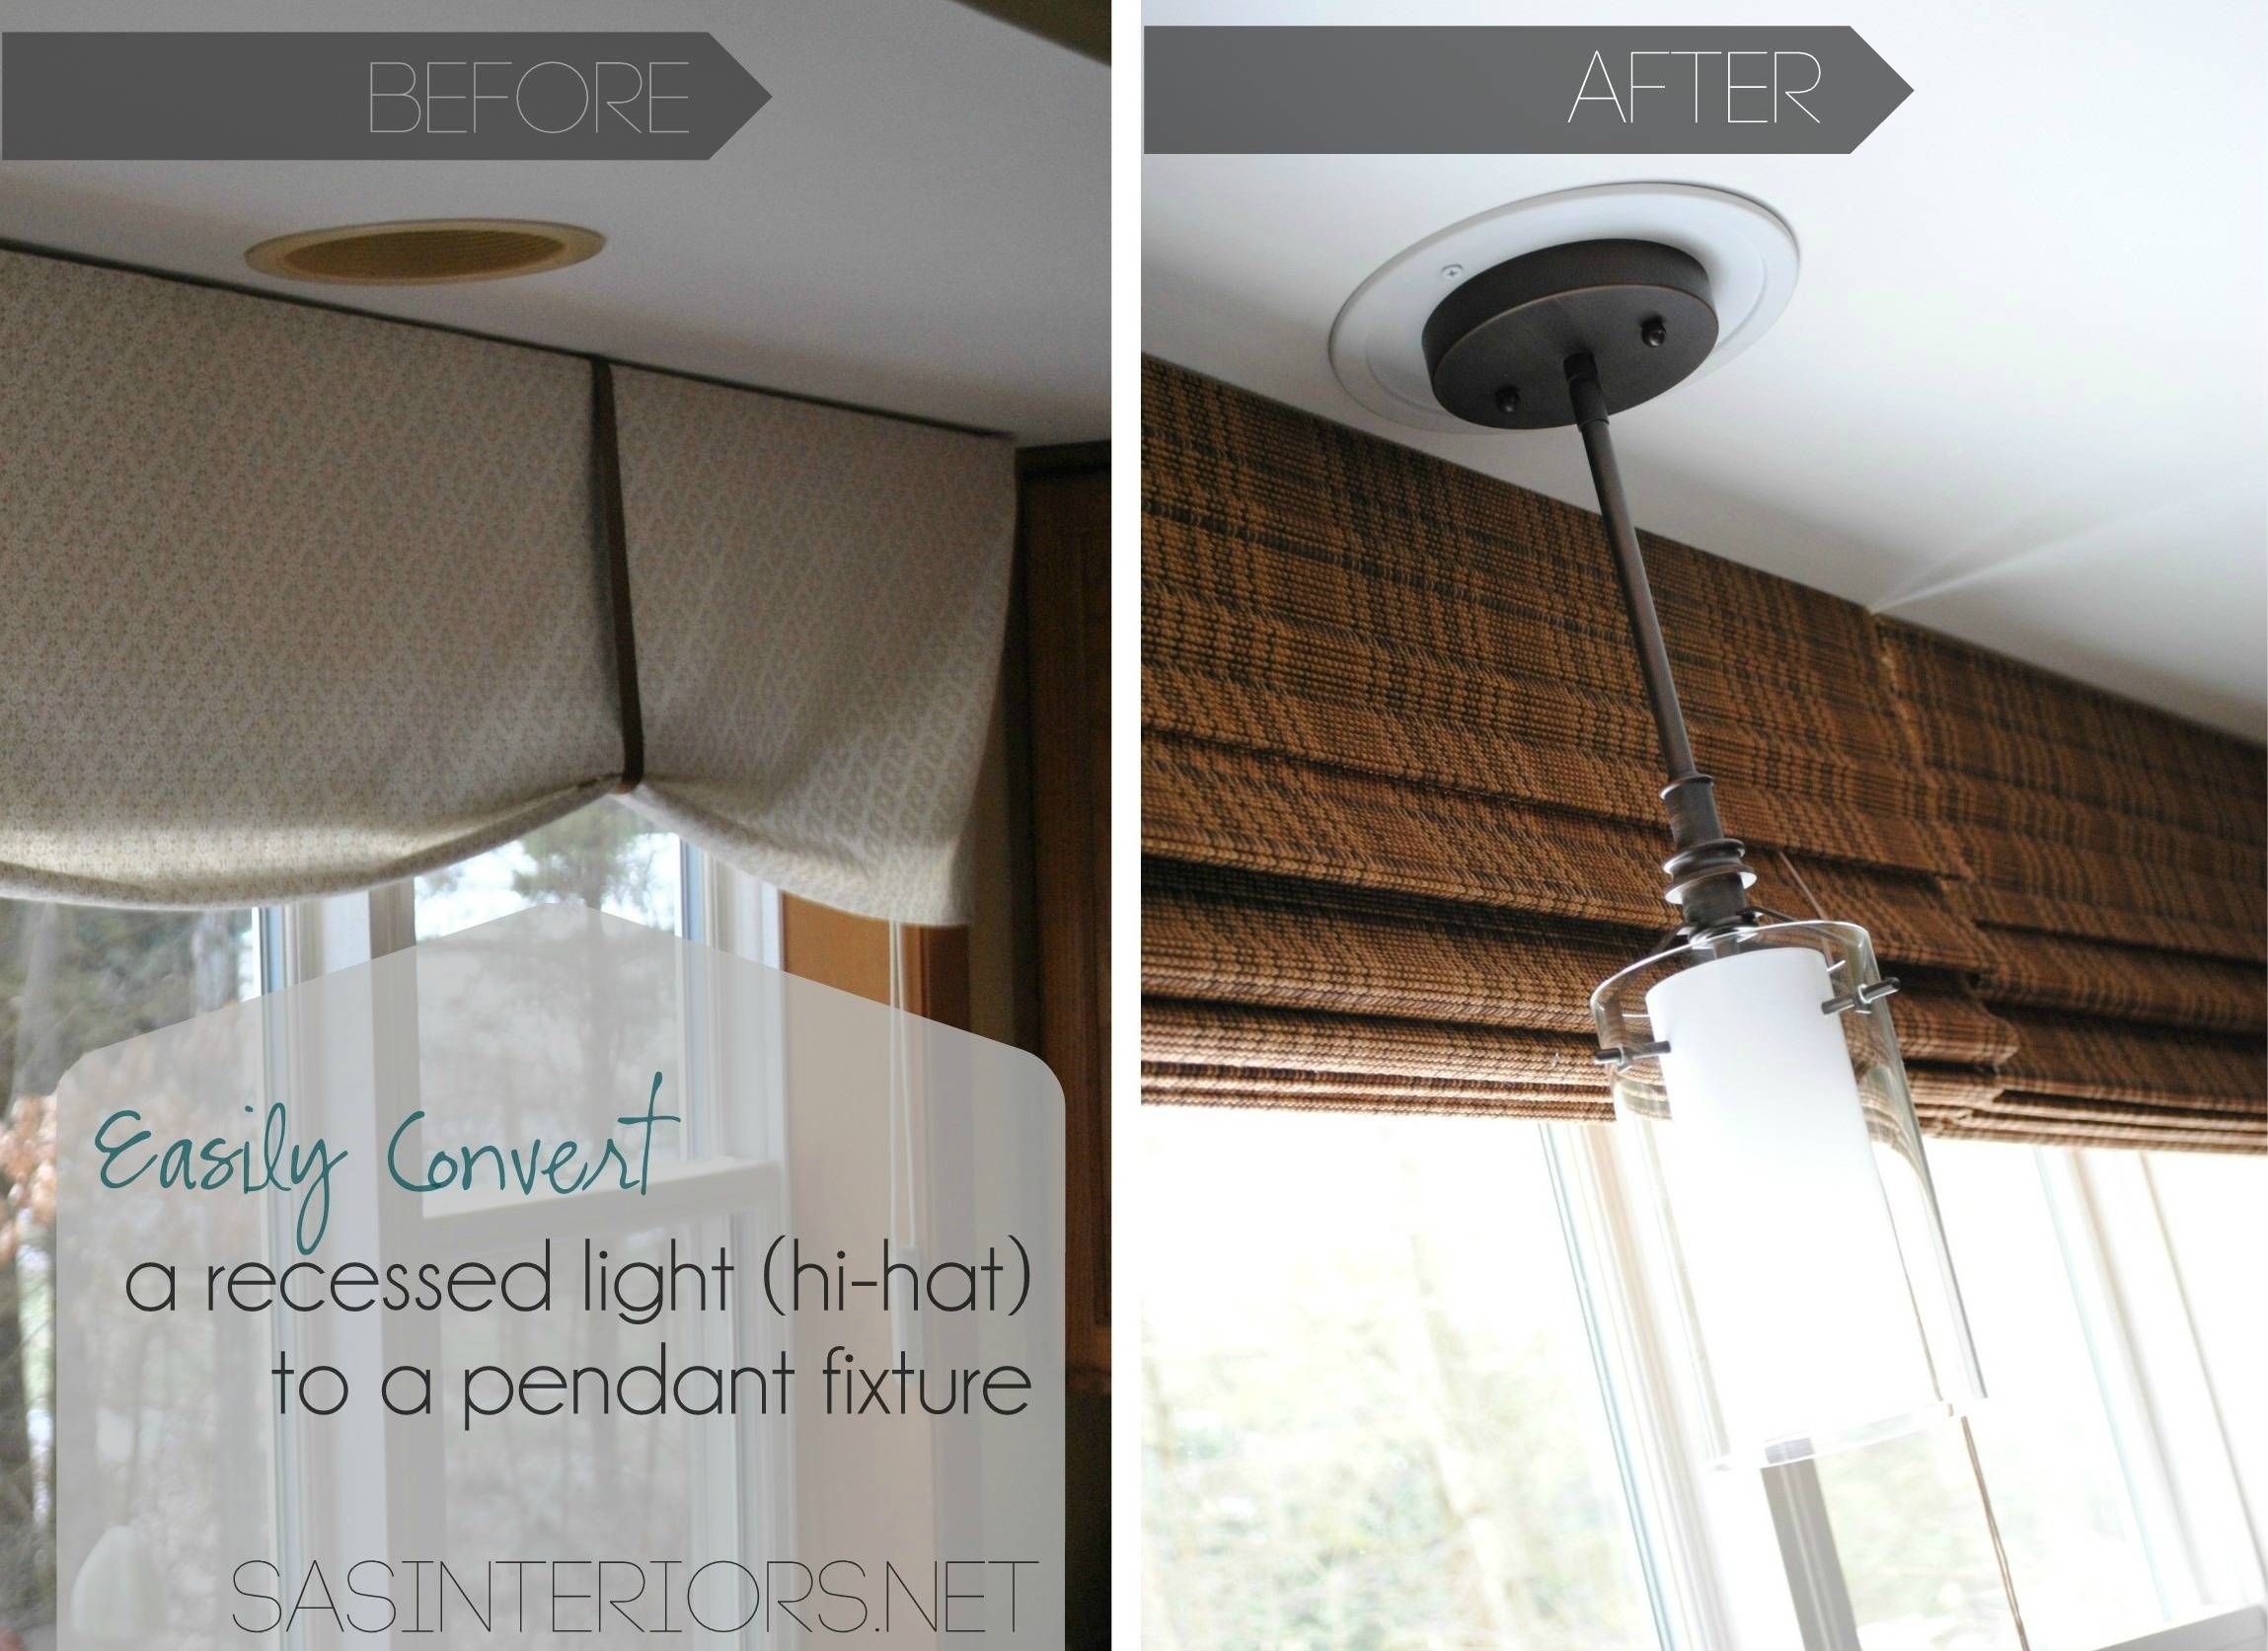 Decorating: Appealing Recessed Light Conversion Kit For Ceiling For Recessed Lights To Pendant (View 2 of 15)